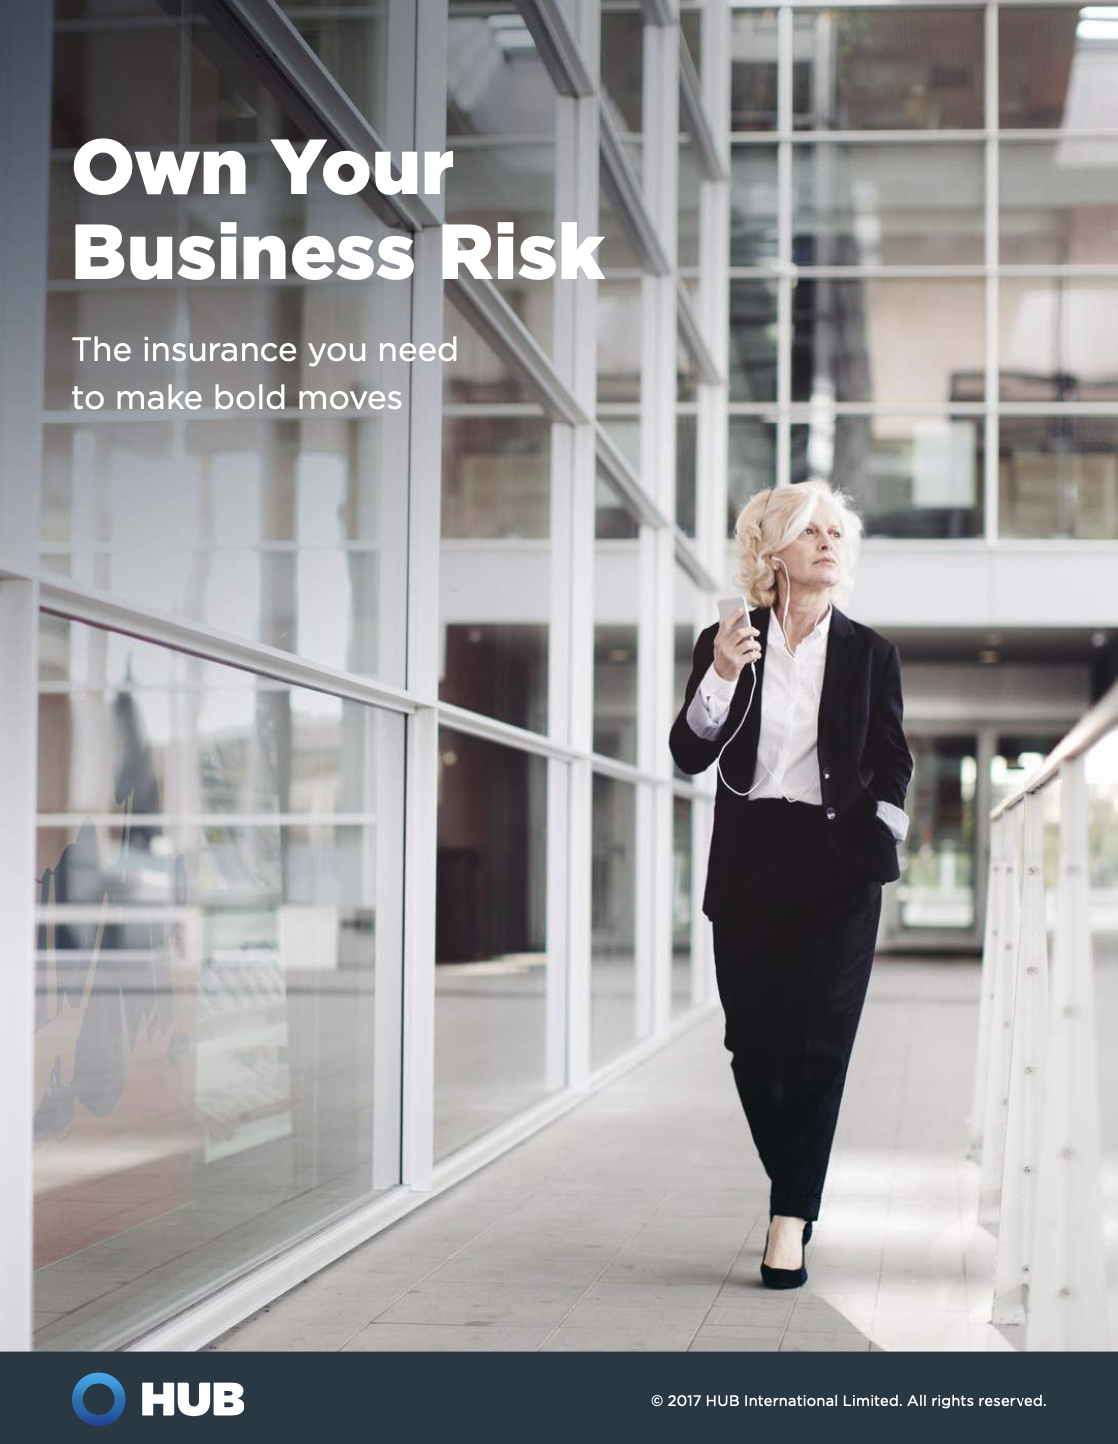 Own Your Business Risk